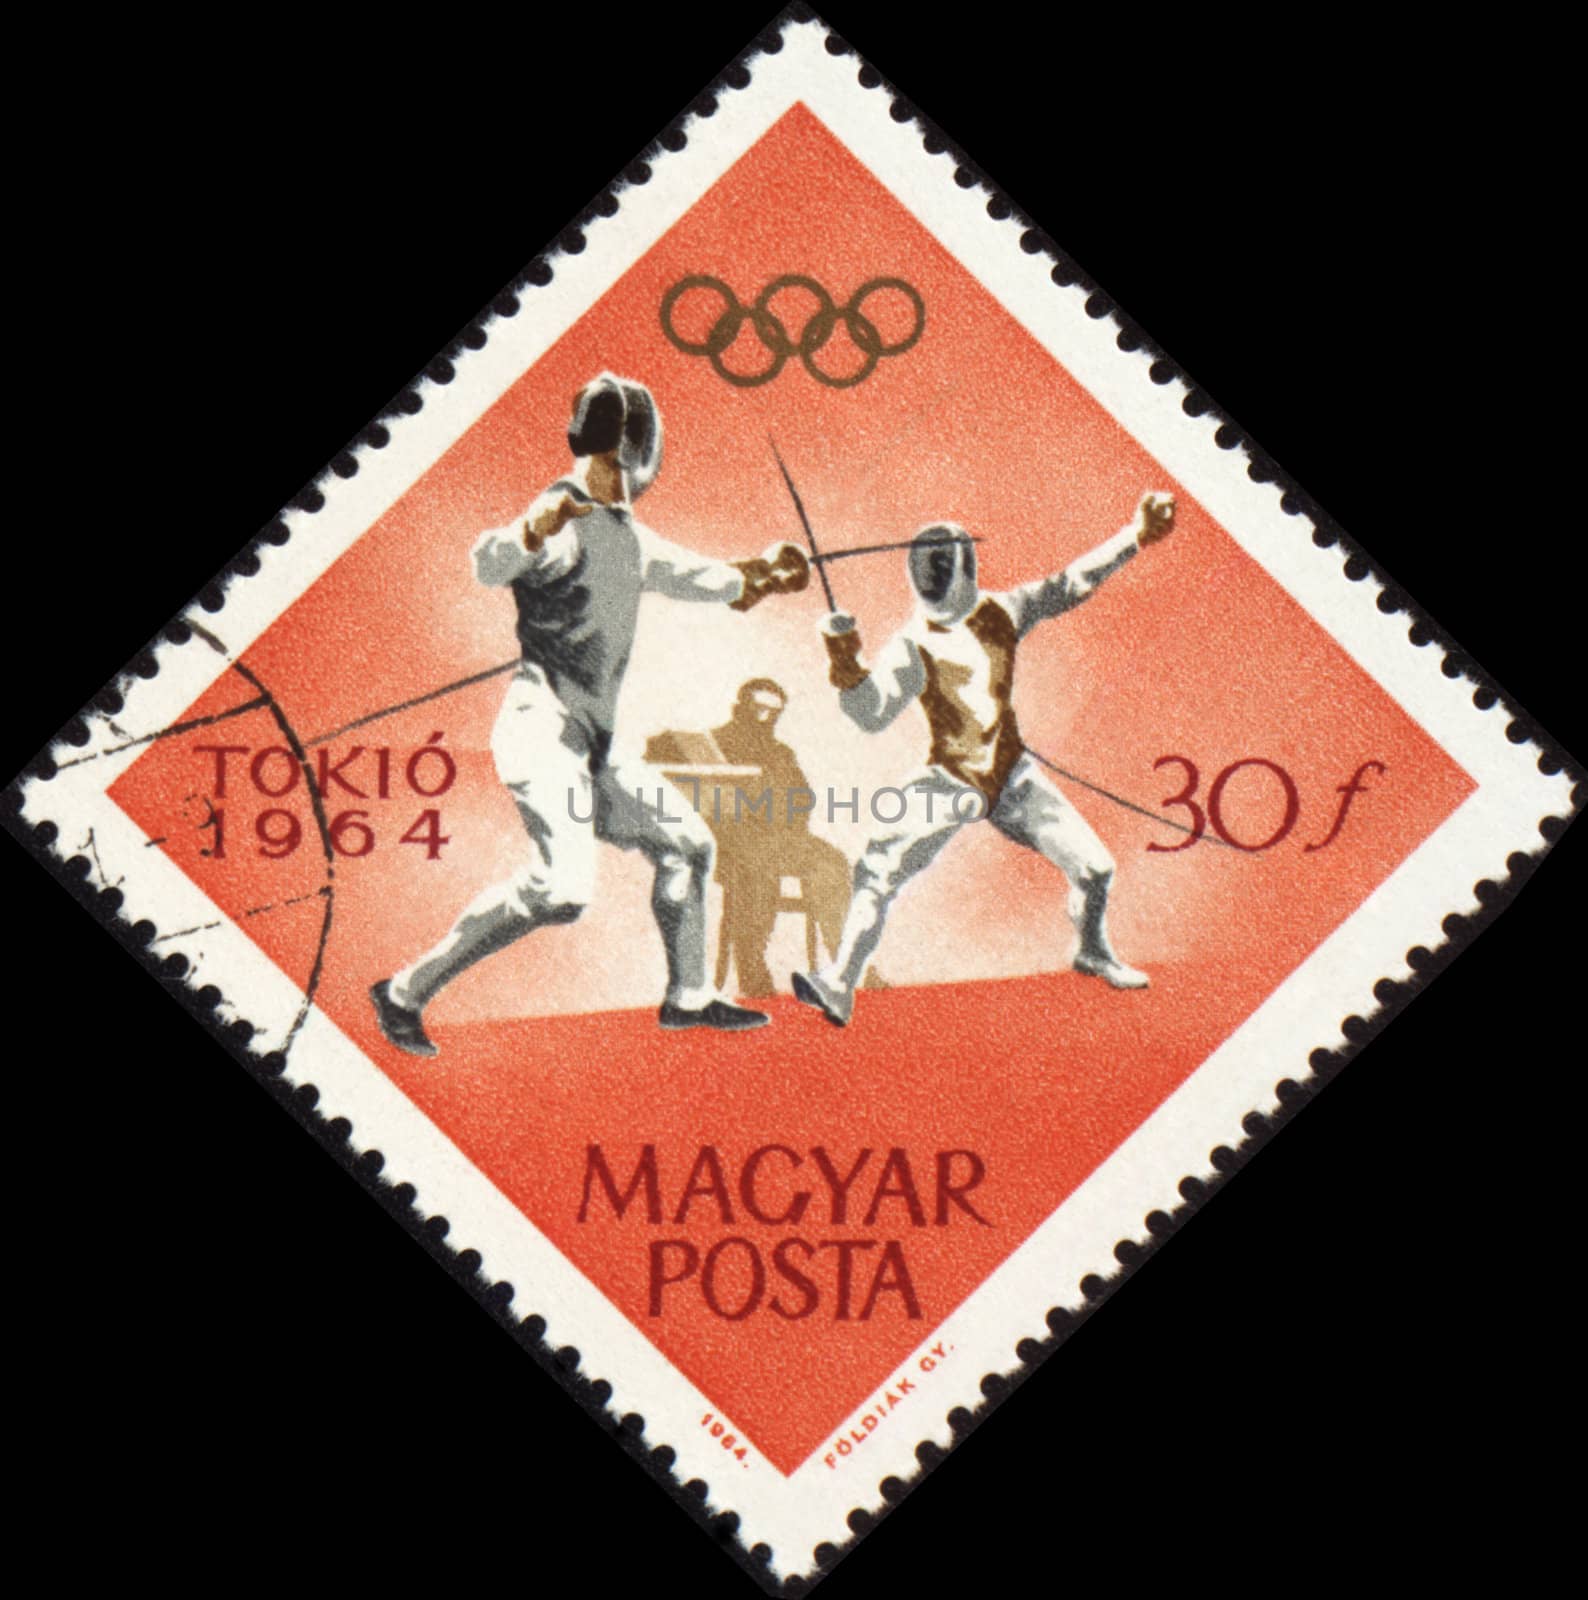 HUNGARY - CIRCA 1964: A post stamp printed in Hungary shows fencing, devoted to Olympic games in Tokio, series, circa 1964